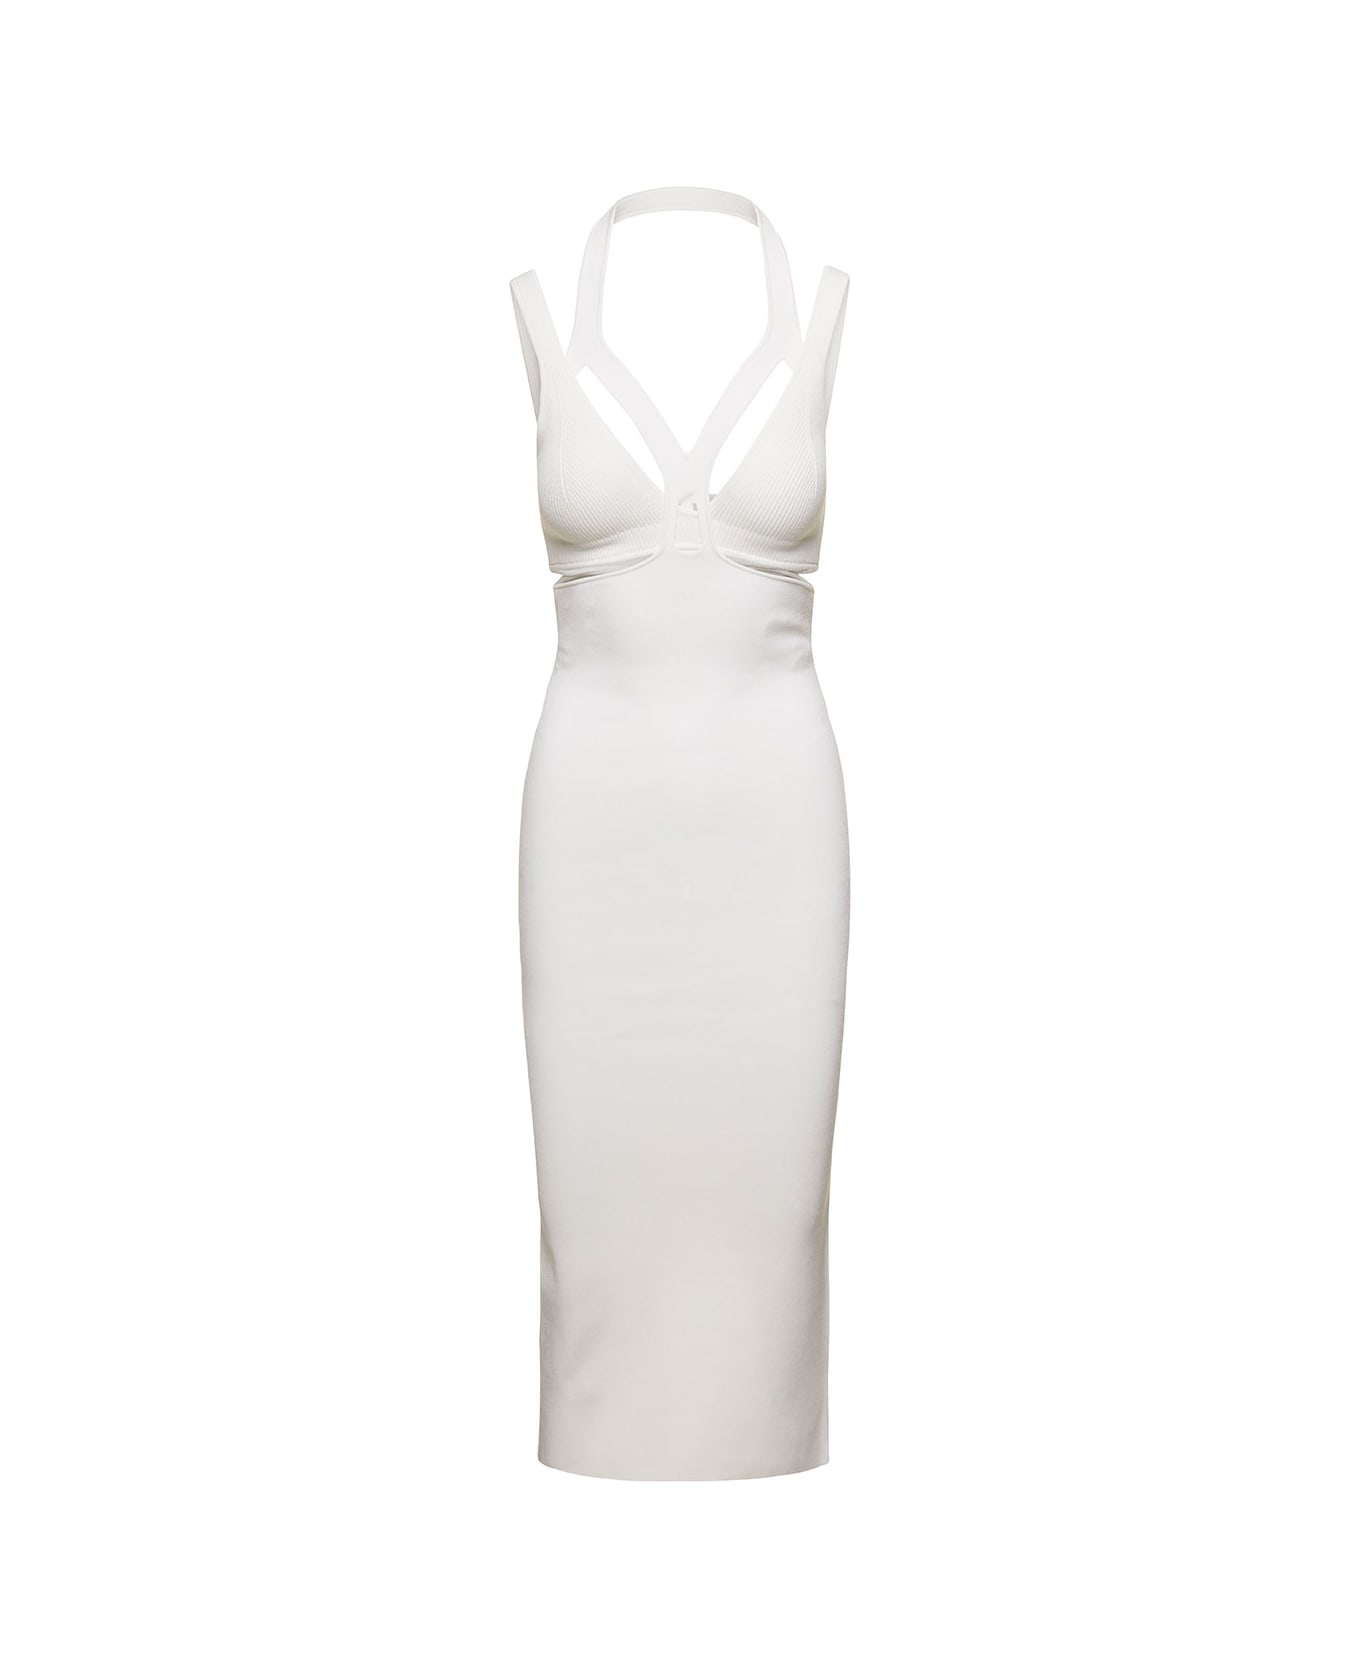 Dion Lee 'interlink' Midi White Dress With Cut-out Detail In Viscose Blend Woman - White